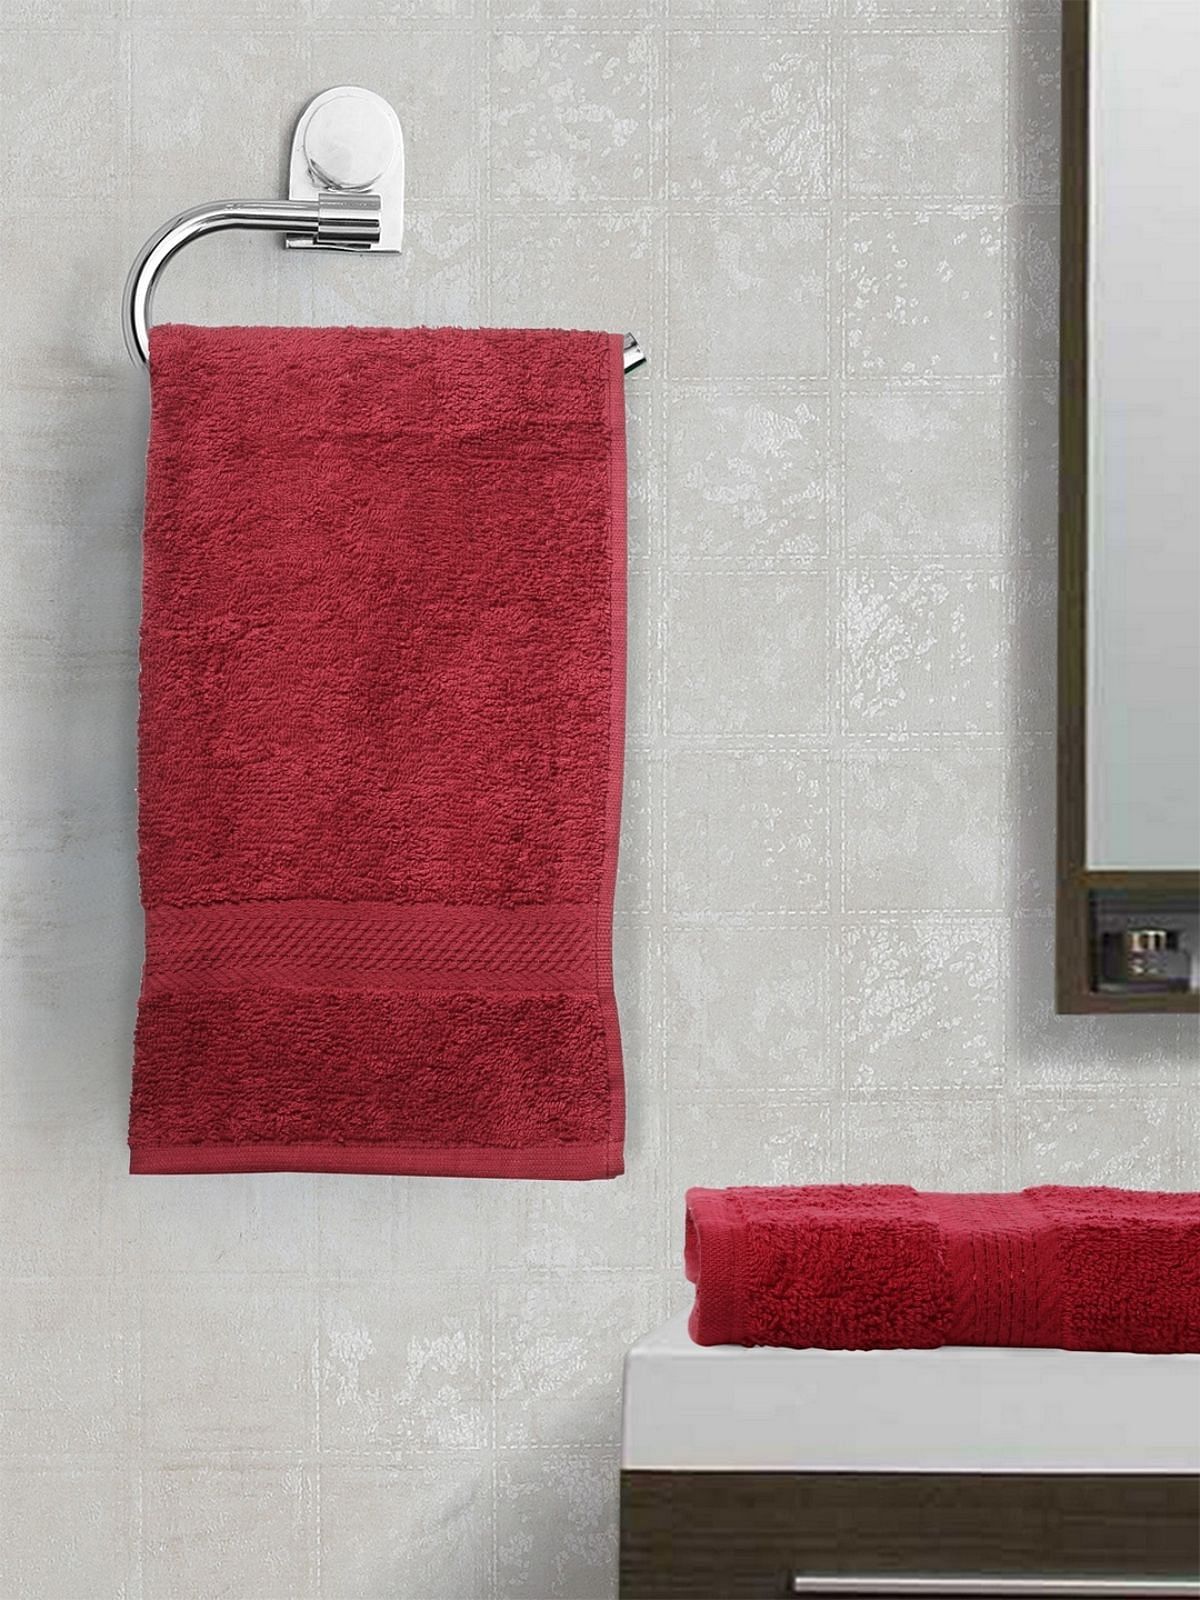 Paradiso Cotton Set Of 2 Hand Towel 40X60 Cm 500 Gsm in Burgundy Colour